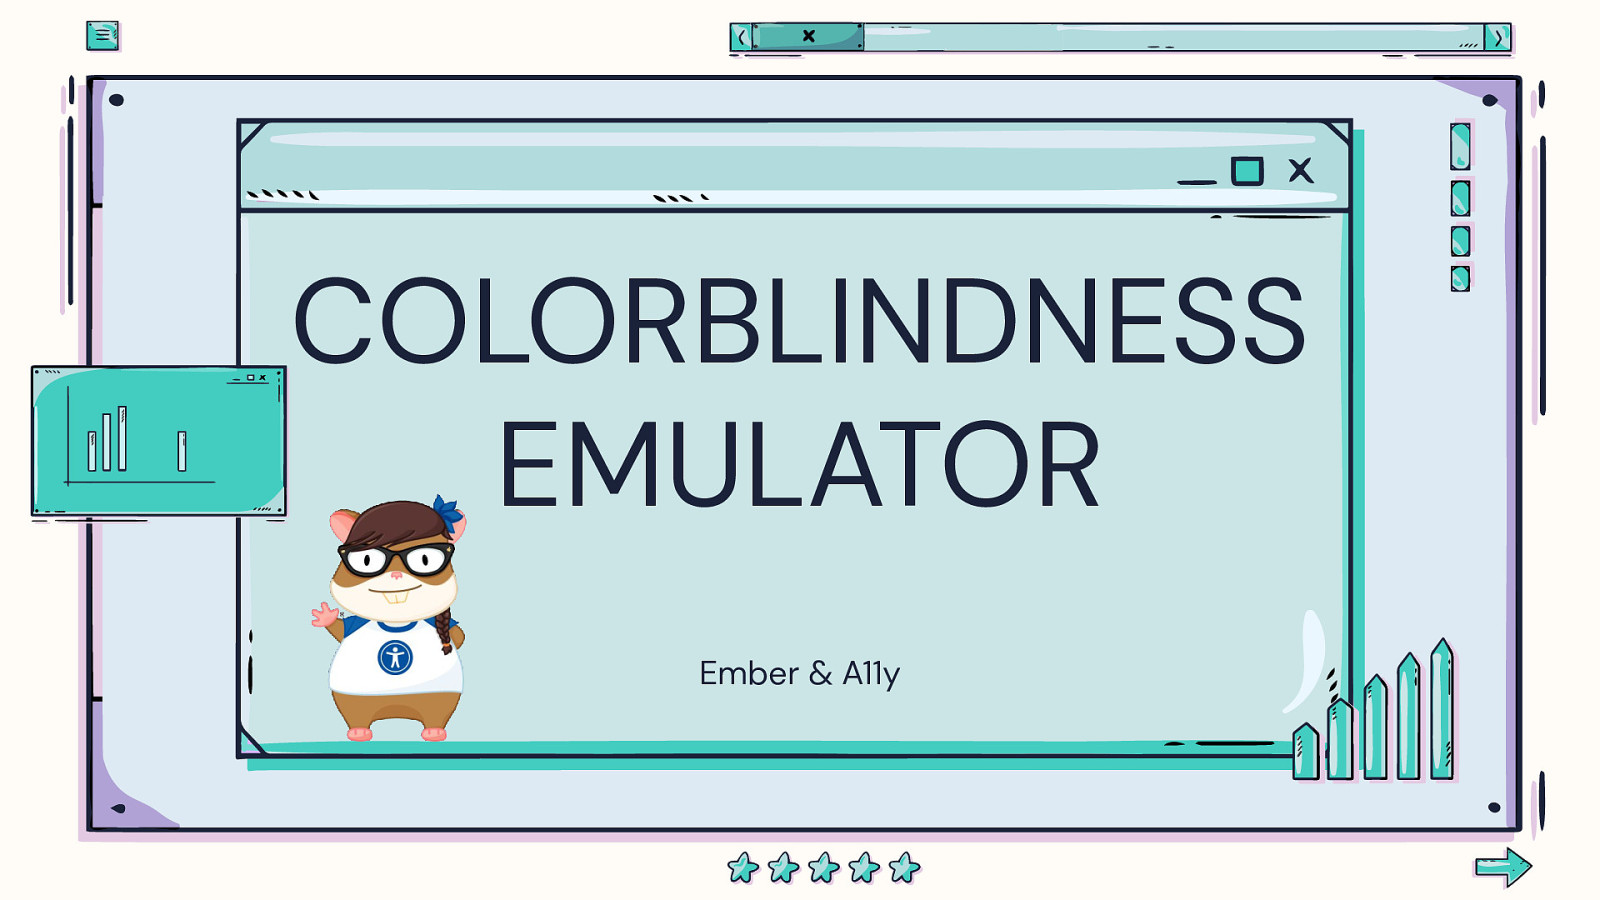 Accessibility & Ember: Learning about Colorblindness